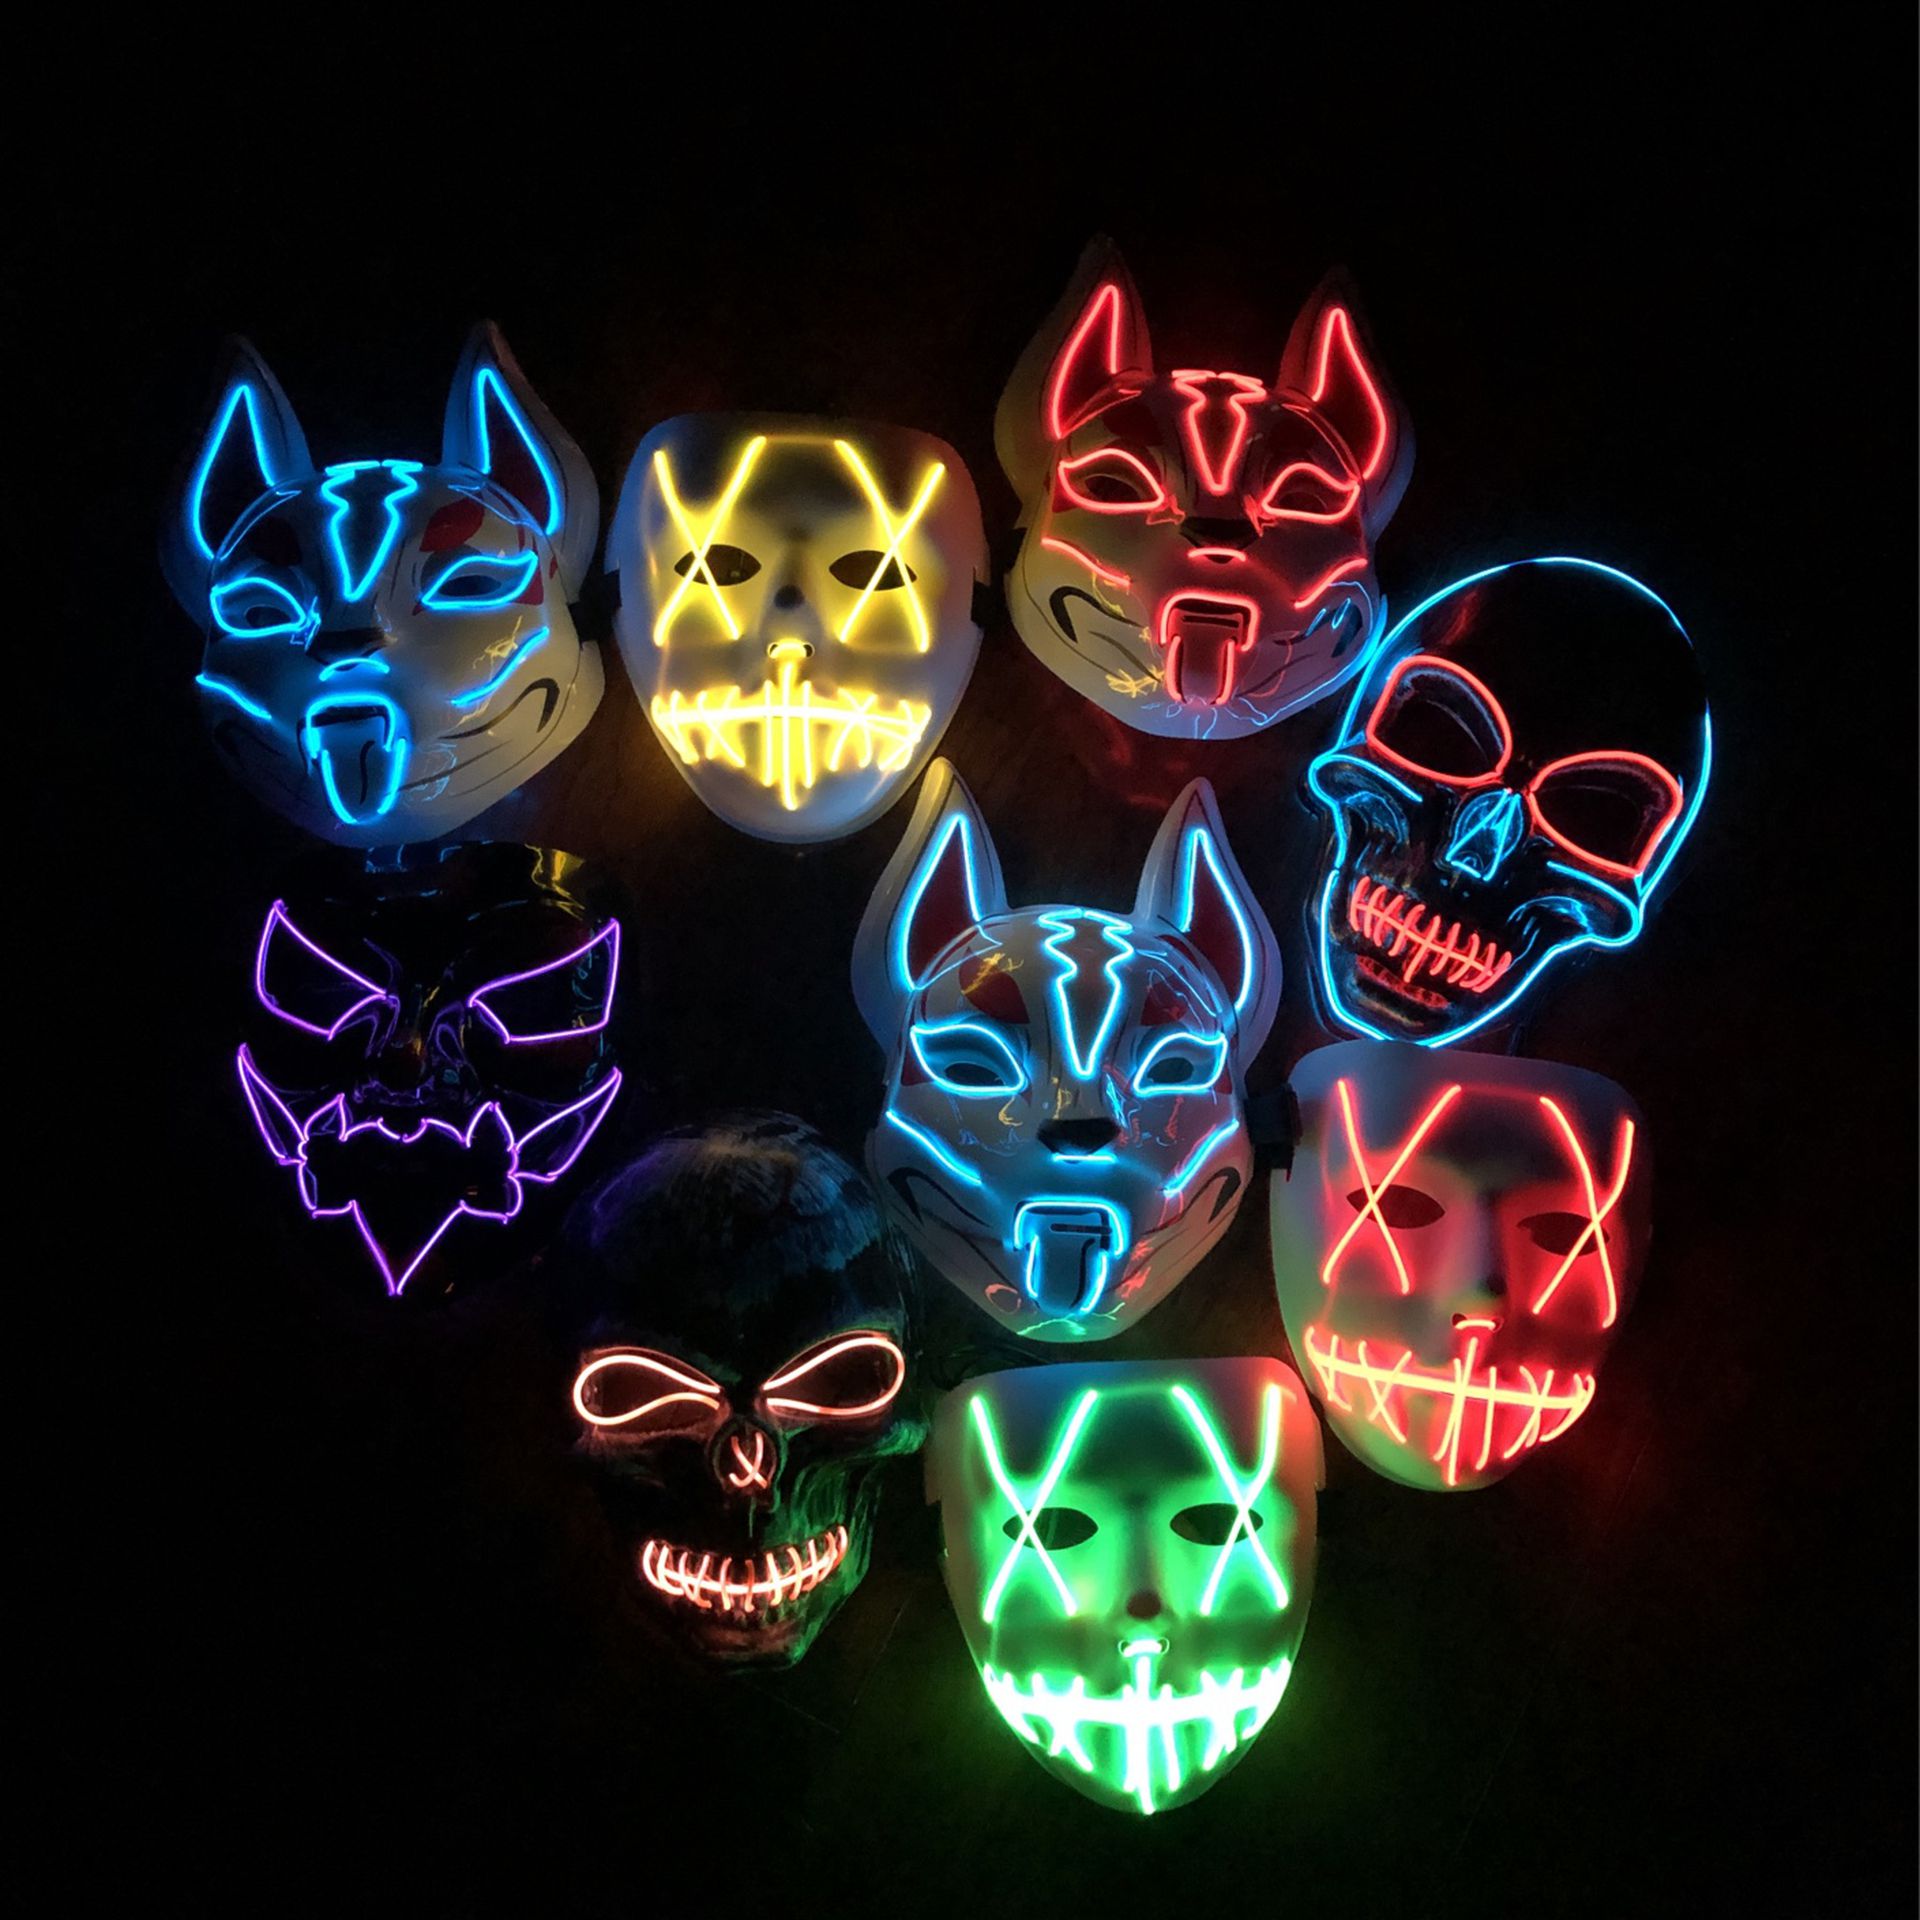 LED Halloween Costume Mask Blowout Limited Quantities!!